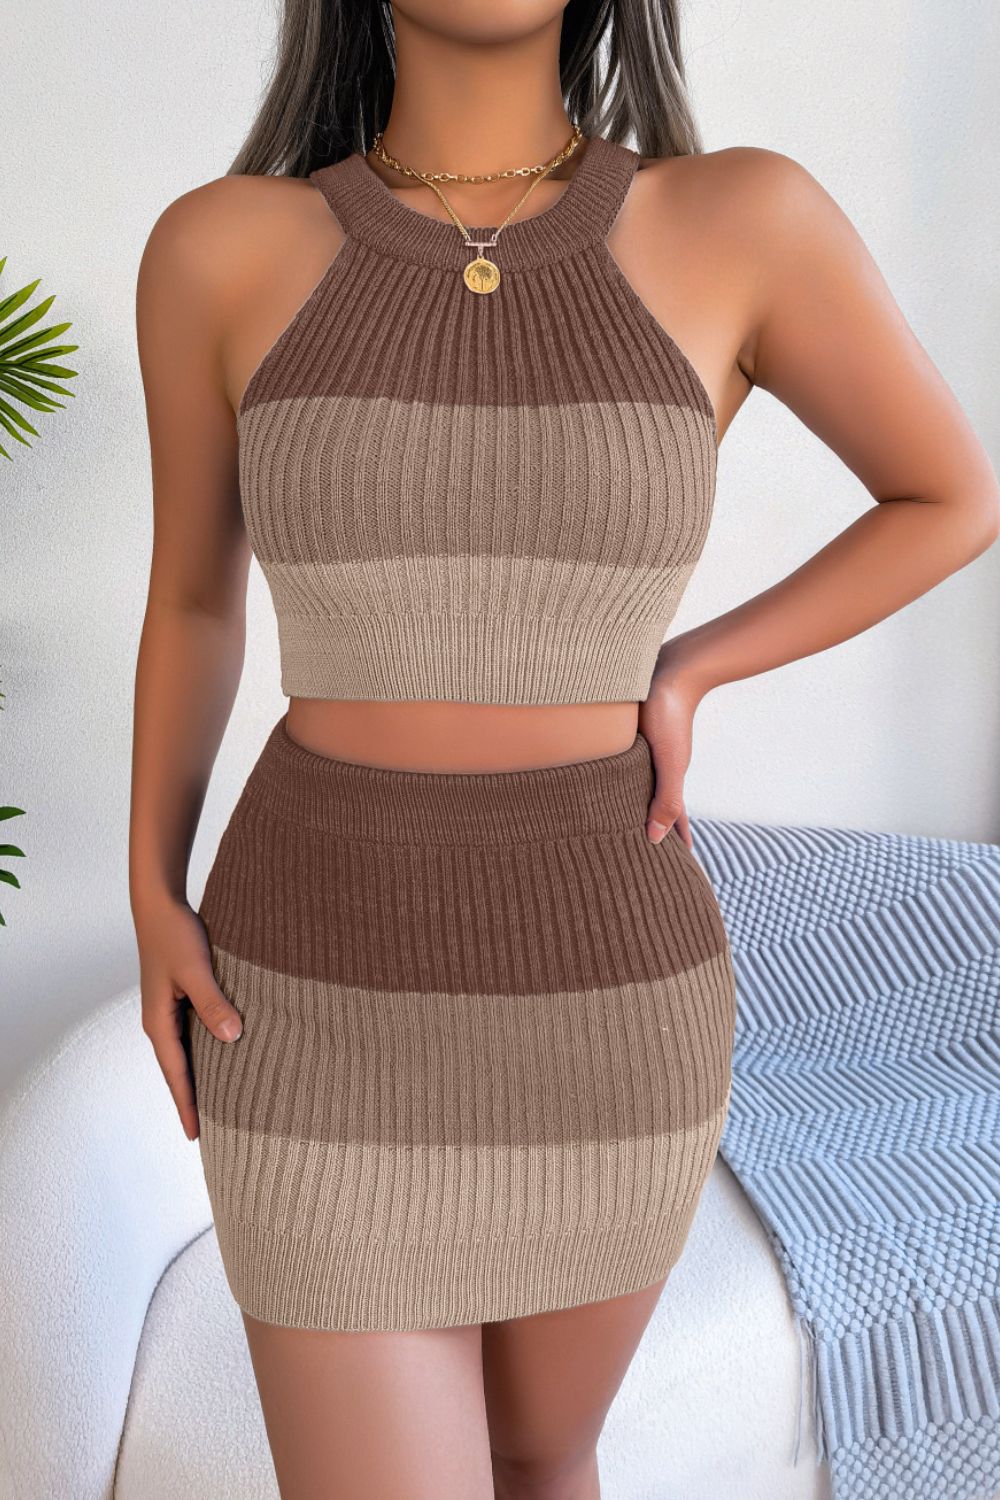 Gray Color Block Sleeveless Crop Knit Top and Skirt Set Outfit Sets